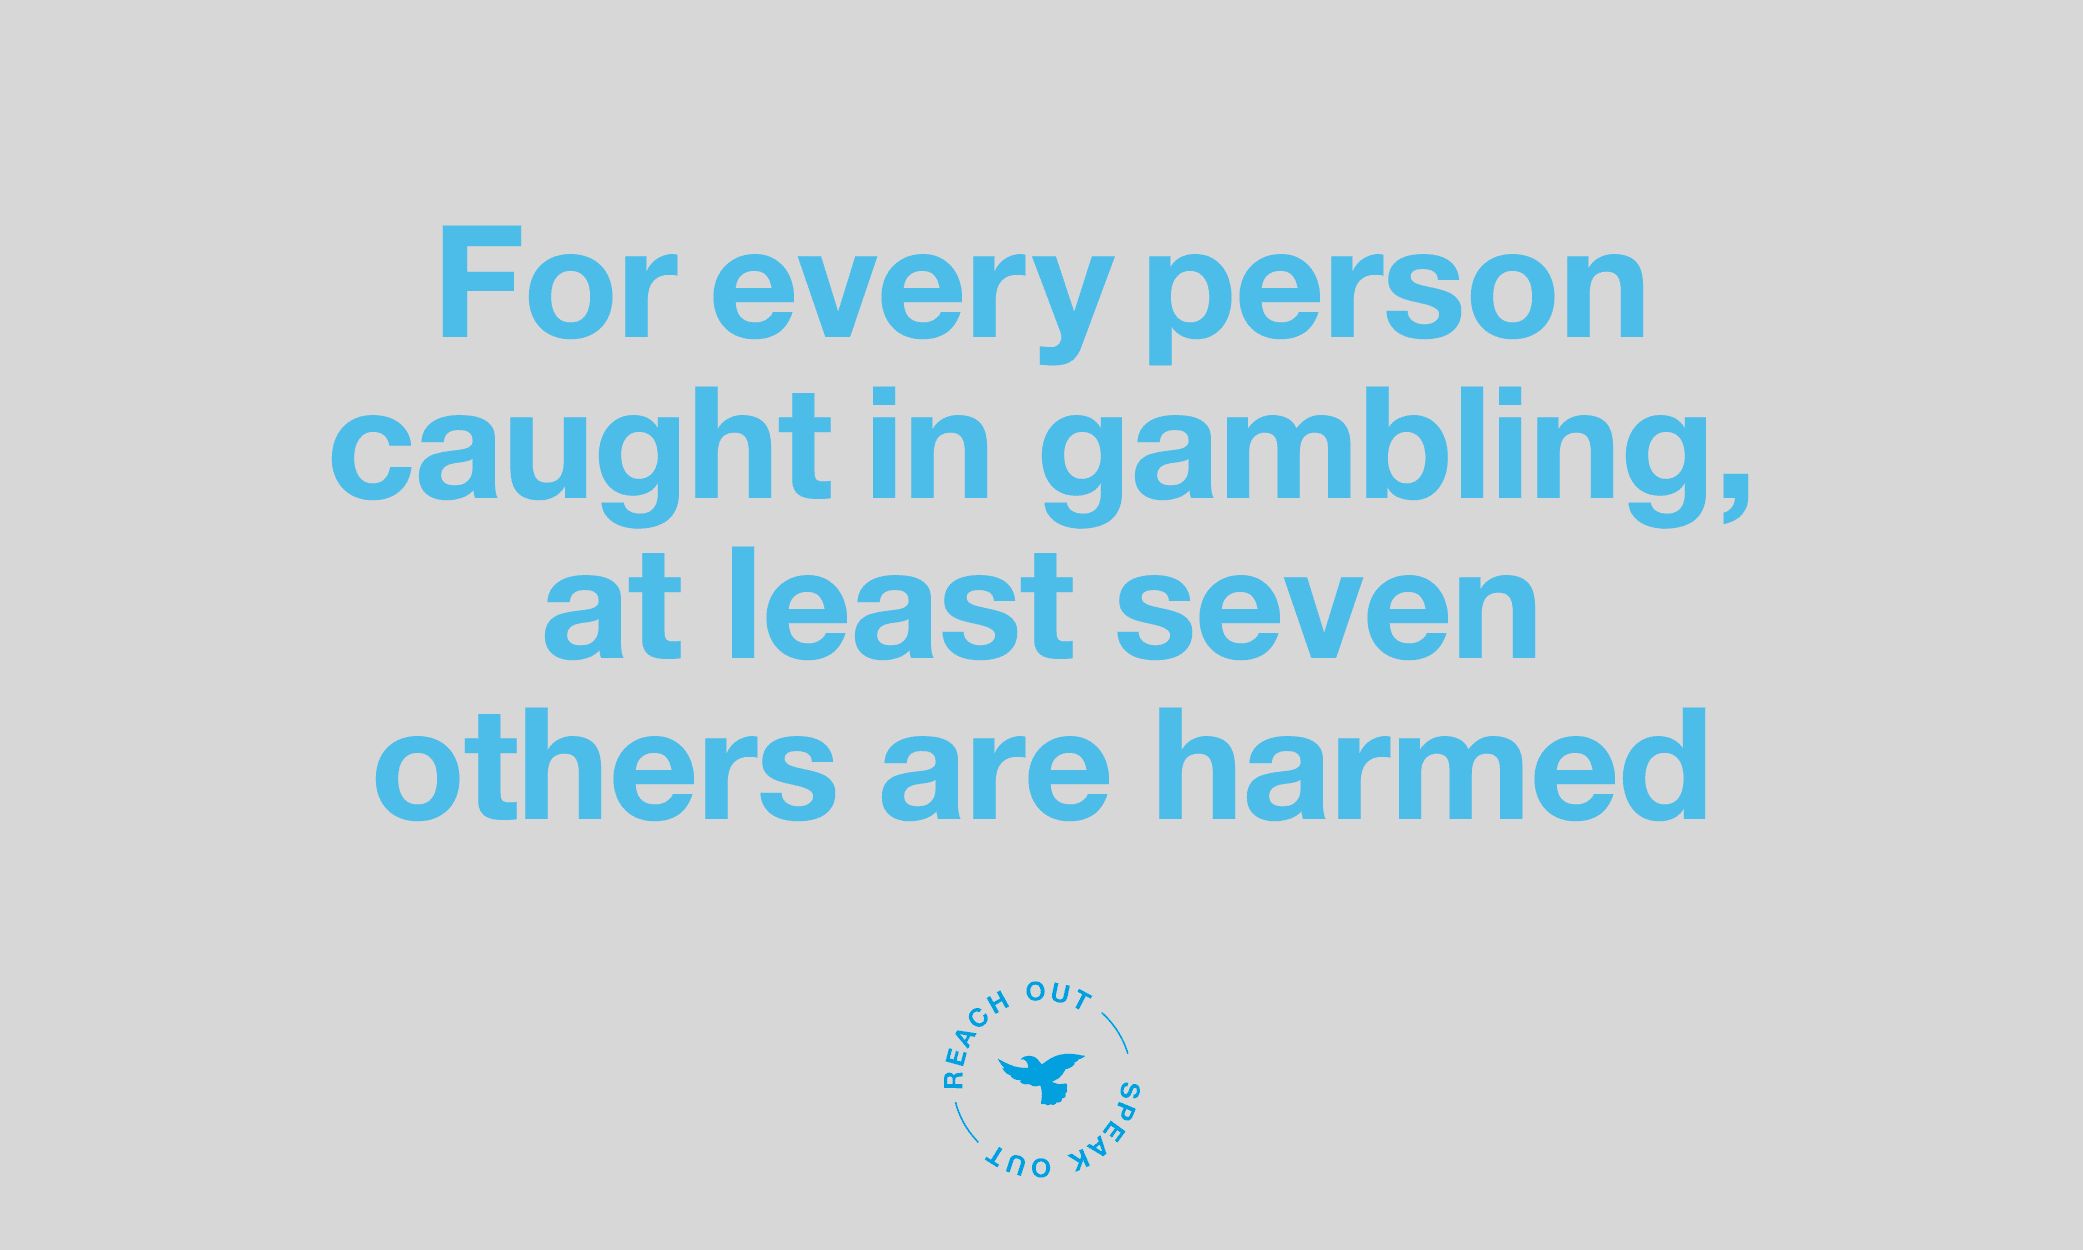 For every person caught in gambling another 7 are harmed